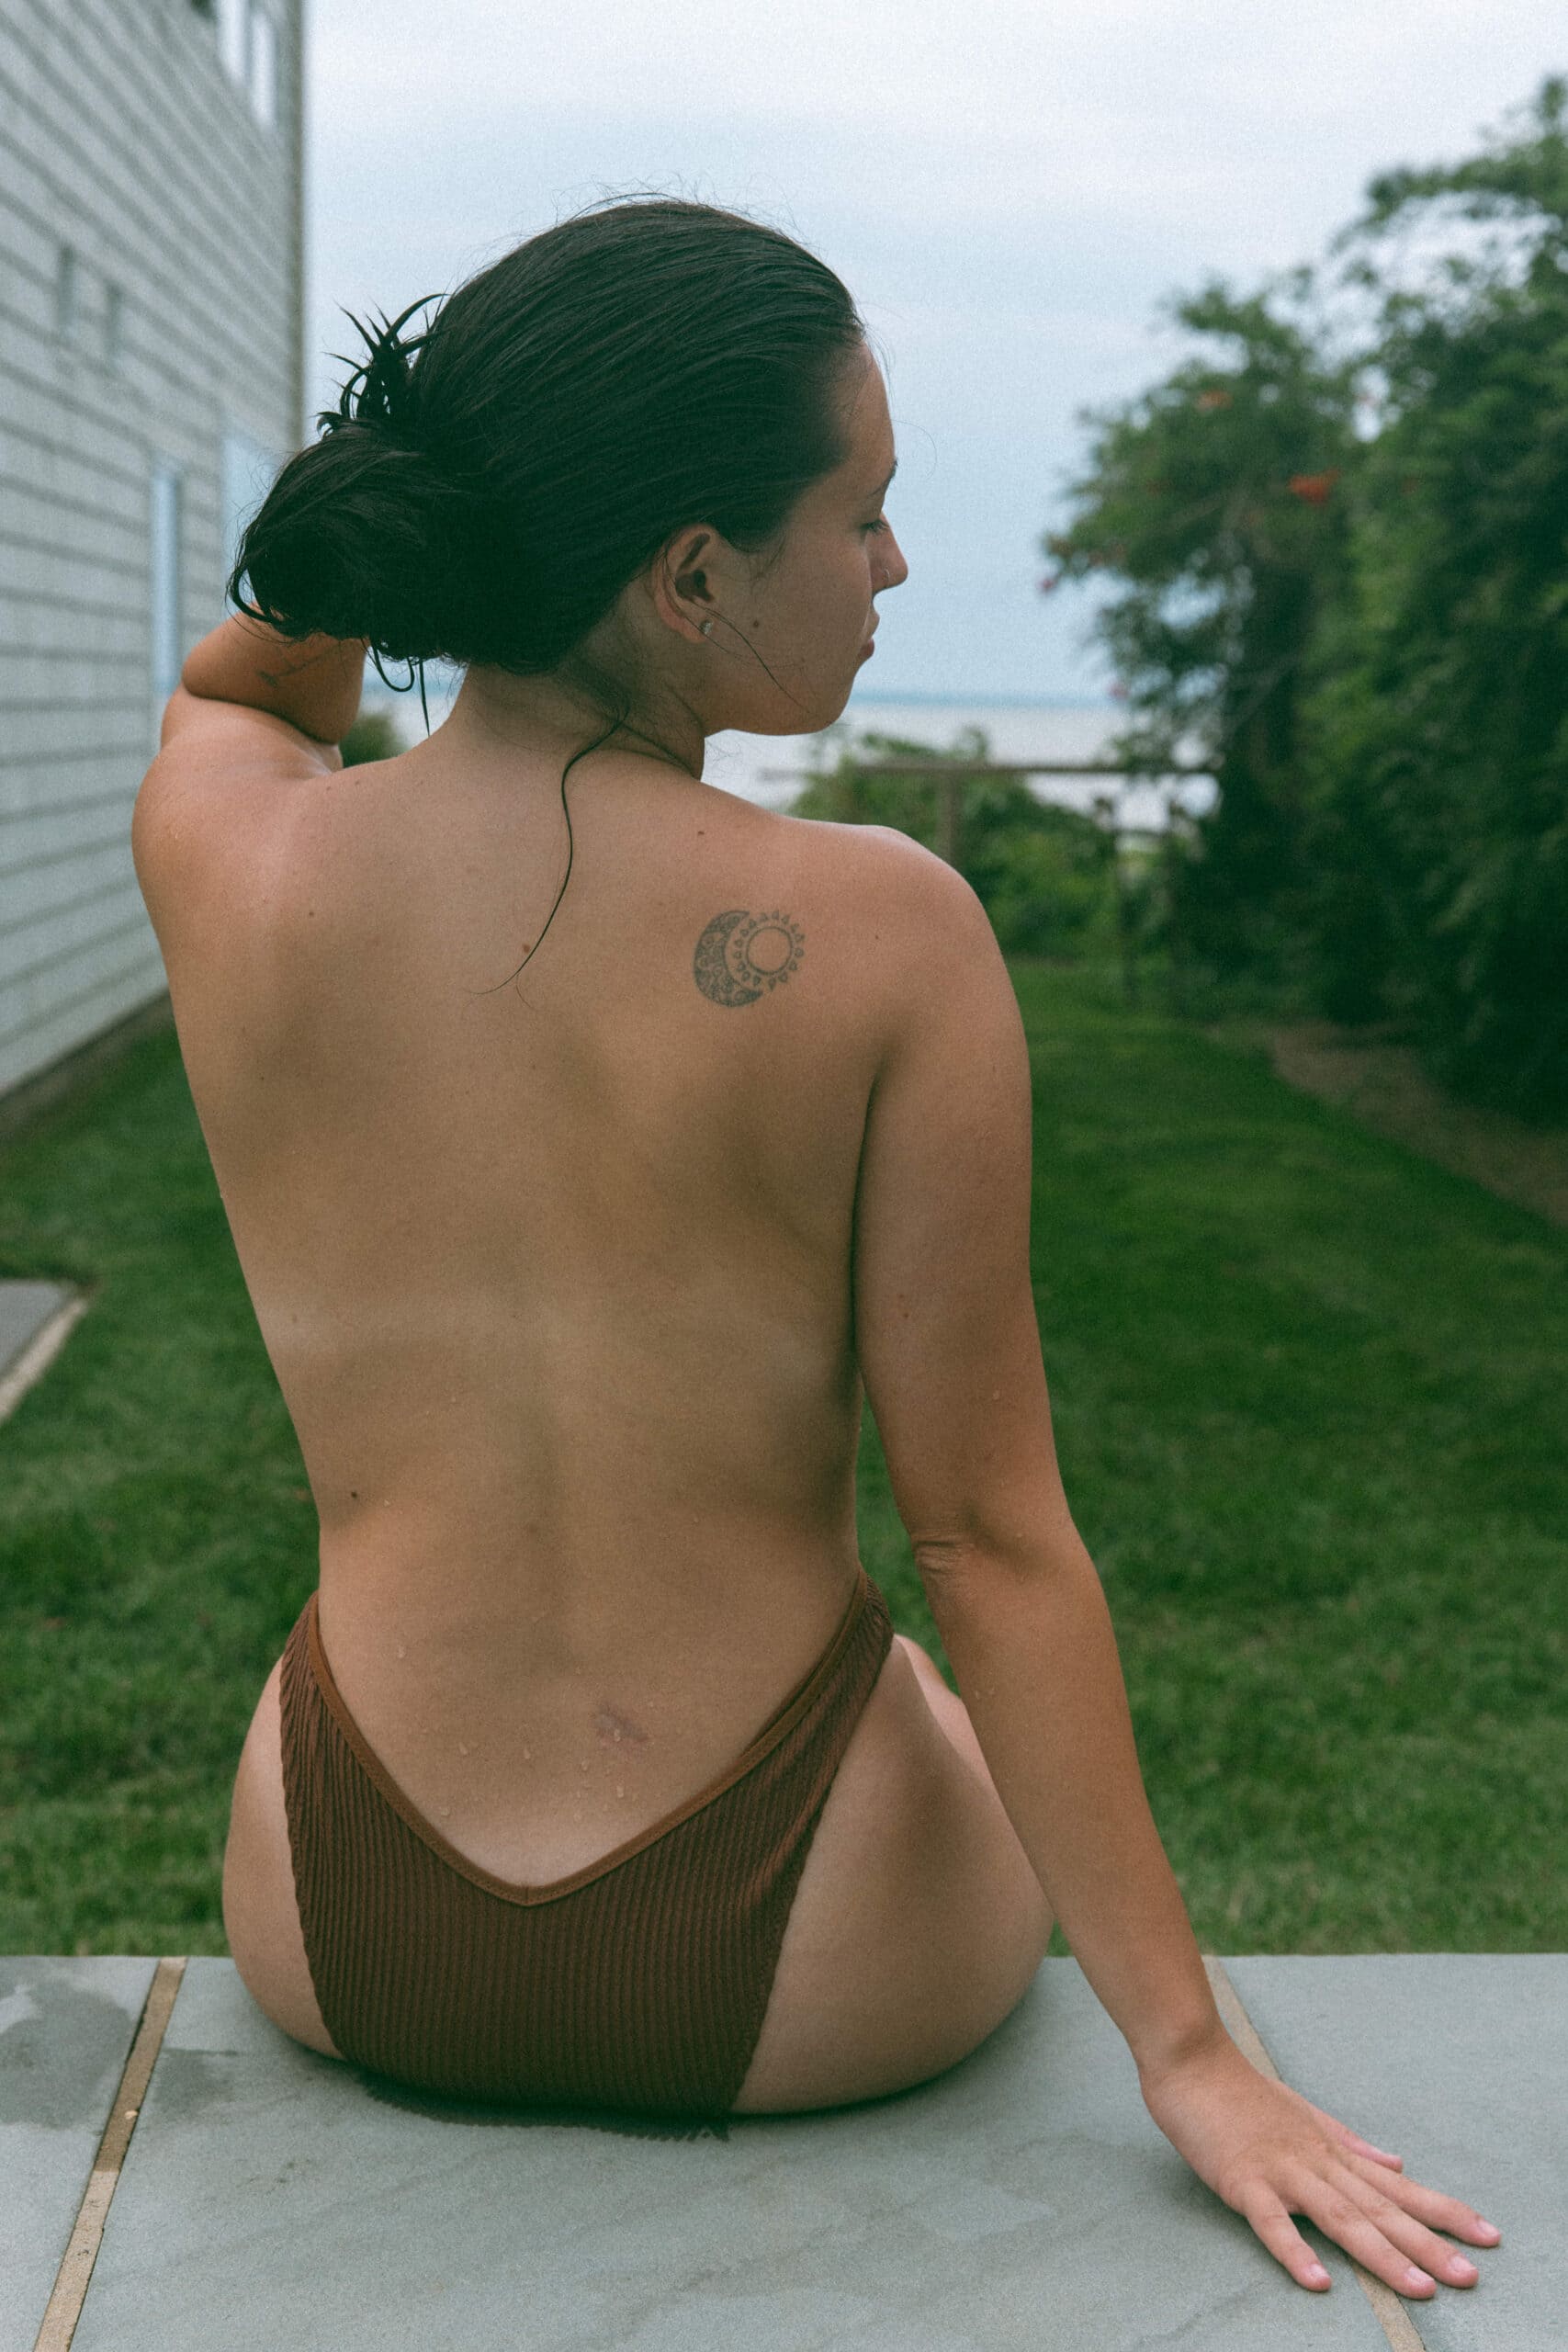 a topless woman's back during and outdoor boudoir session